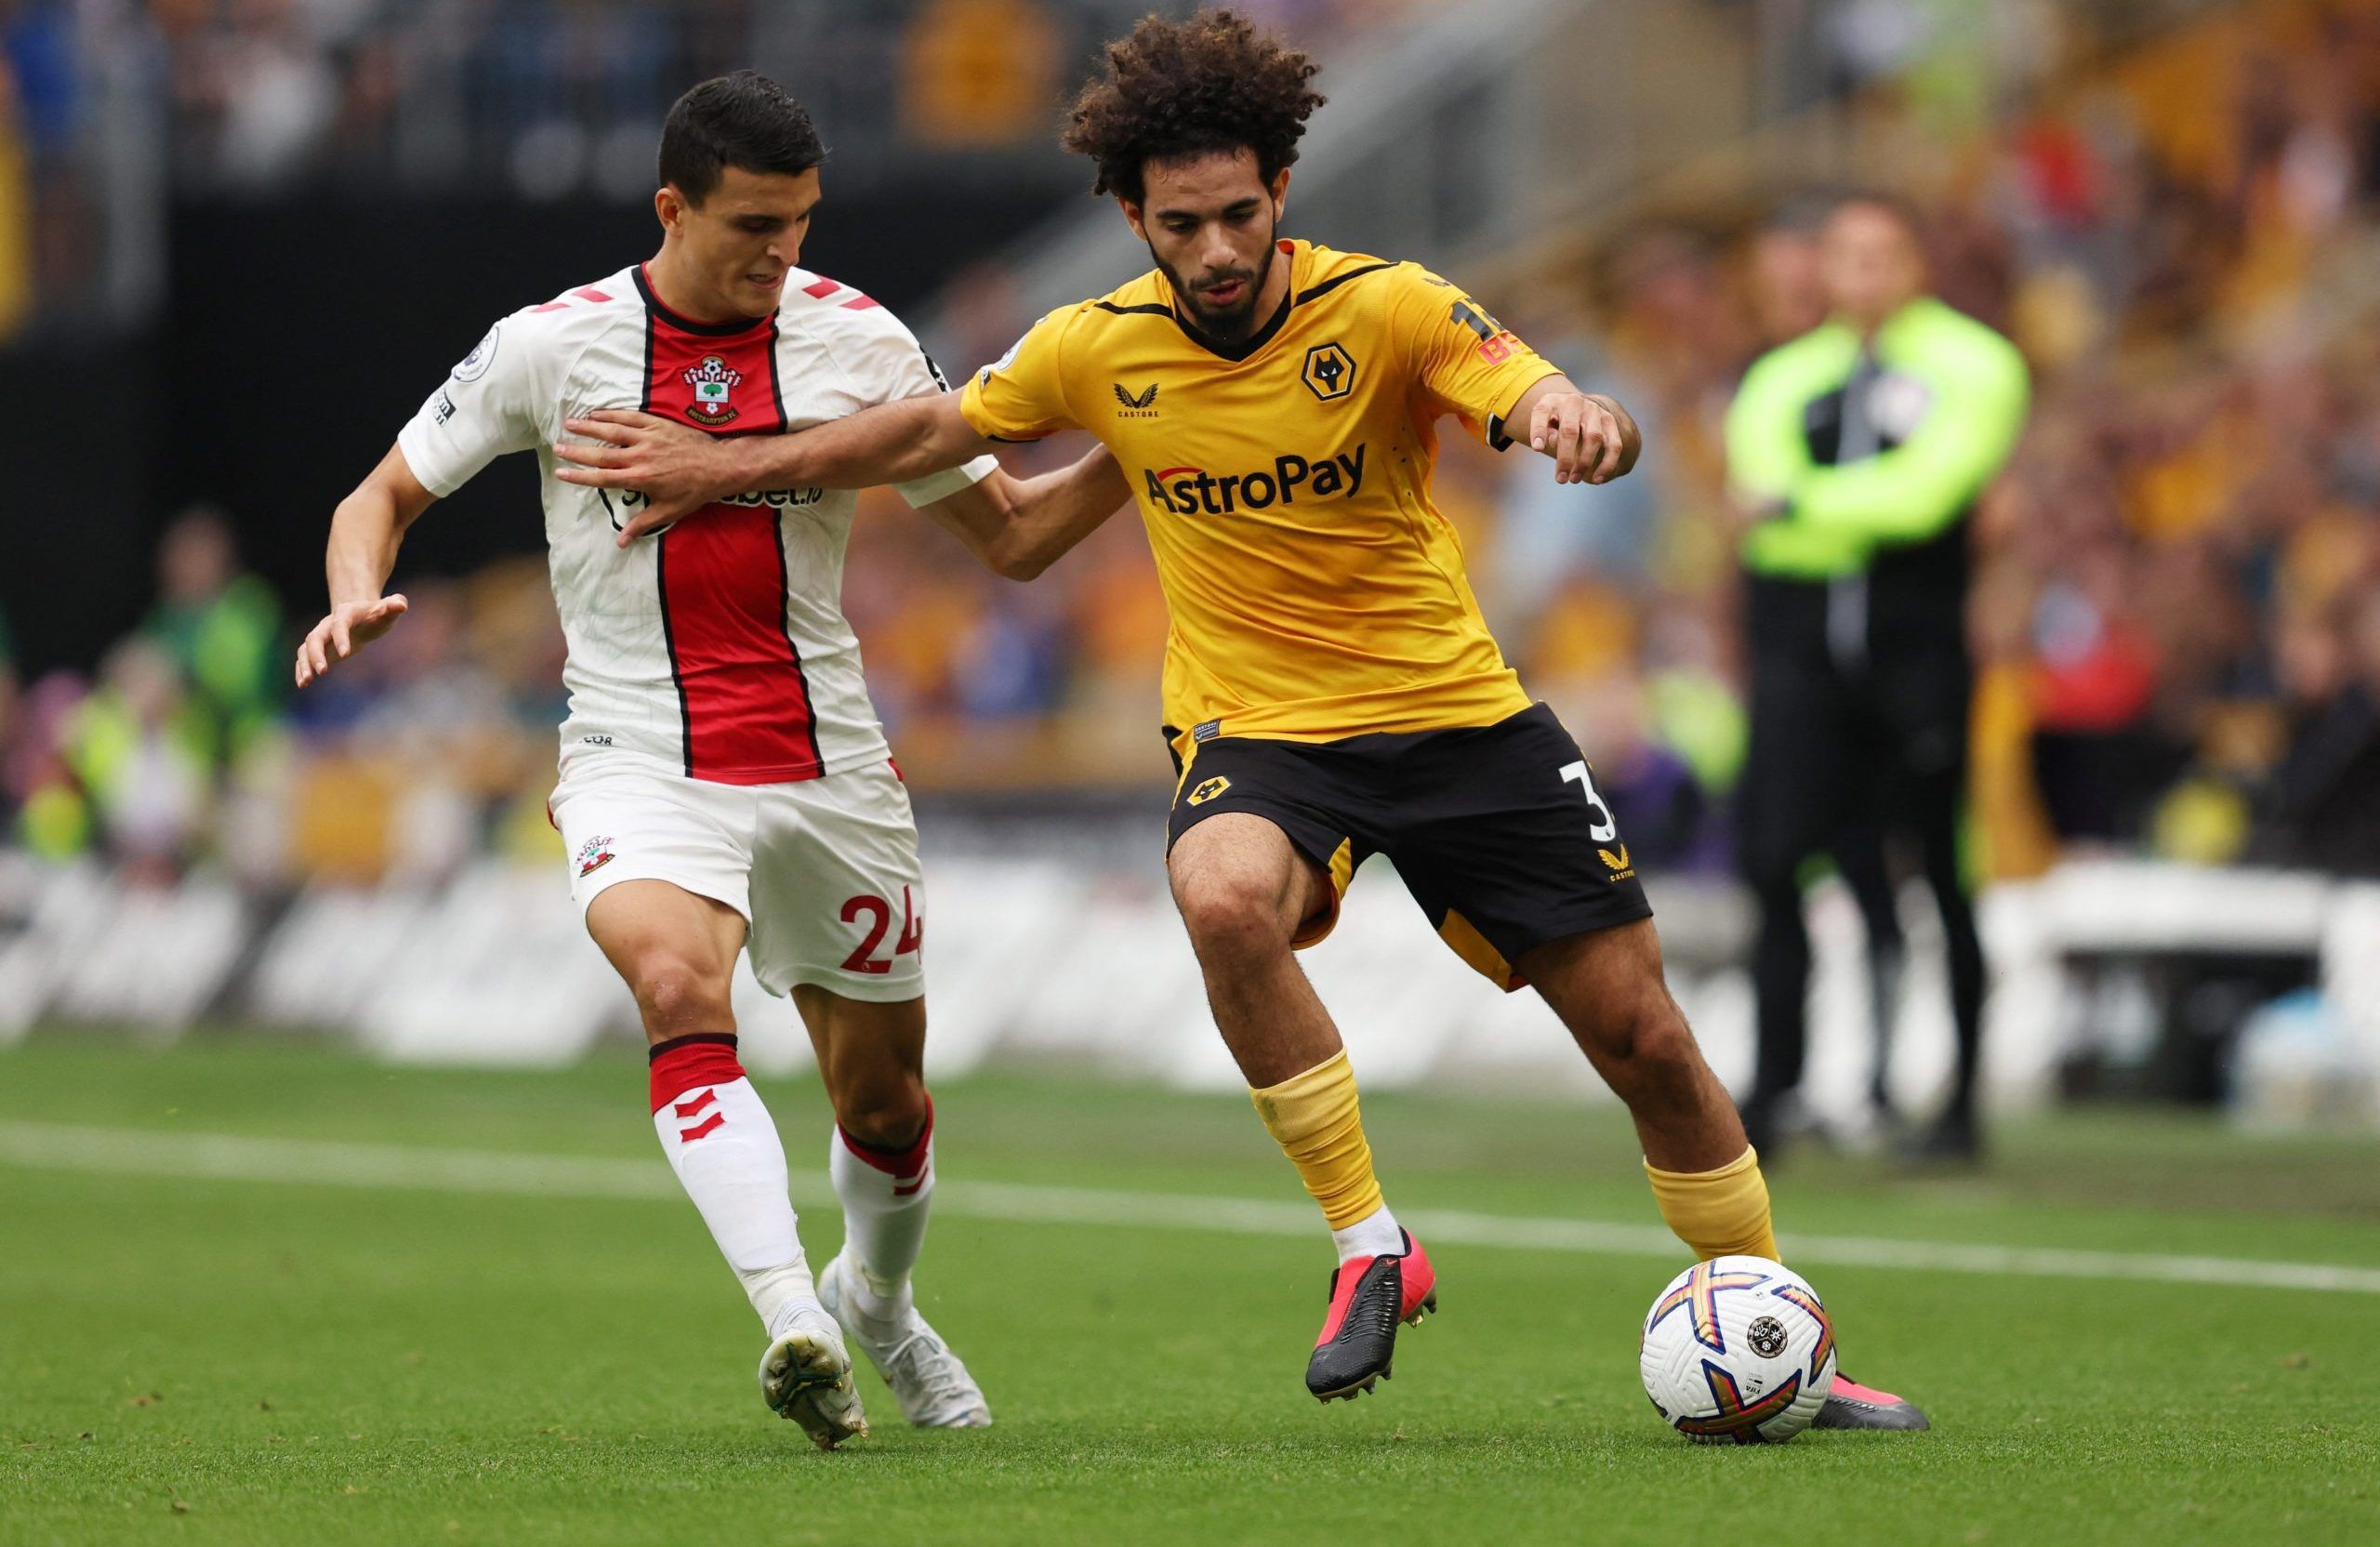 Soccer Football - Premier League - Wolverhampton Wanderers v Southampton - Molineux Stadium, Wolverhampton, Britain - September 3, 2022 Southampton's Mohamed Elyounoussi in action with Wolverhampton Wanderers' Rayan Ait-Nouri Action Images via Reuters/John Clifton EDITORIAL USE ONLY. No use with unauthorized audio, video, data, fixture lists, club/league logos or 'live' services. Online in-match use limited to 75 images, no video emulation. No use in betting, games or single club /league/player 